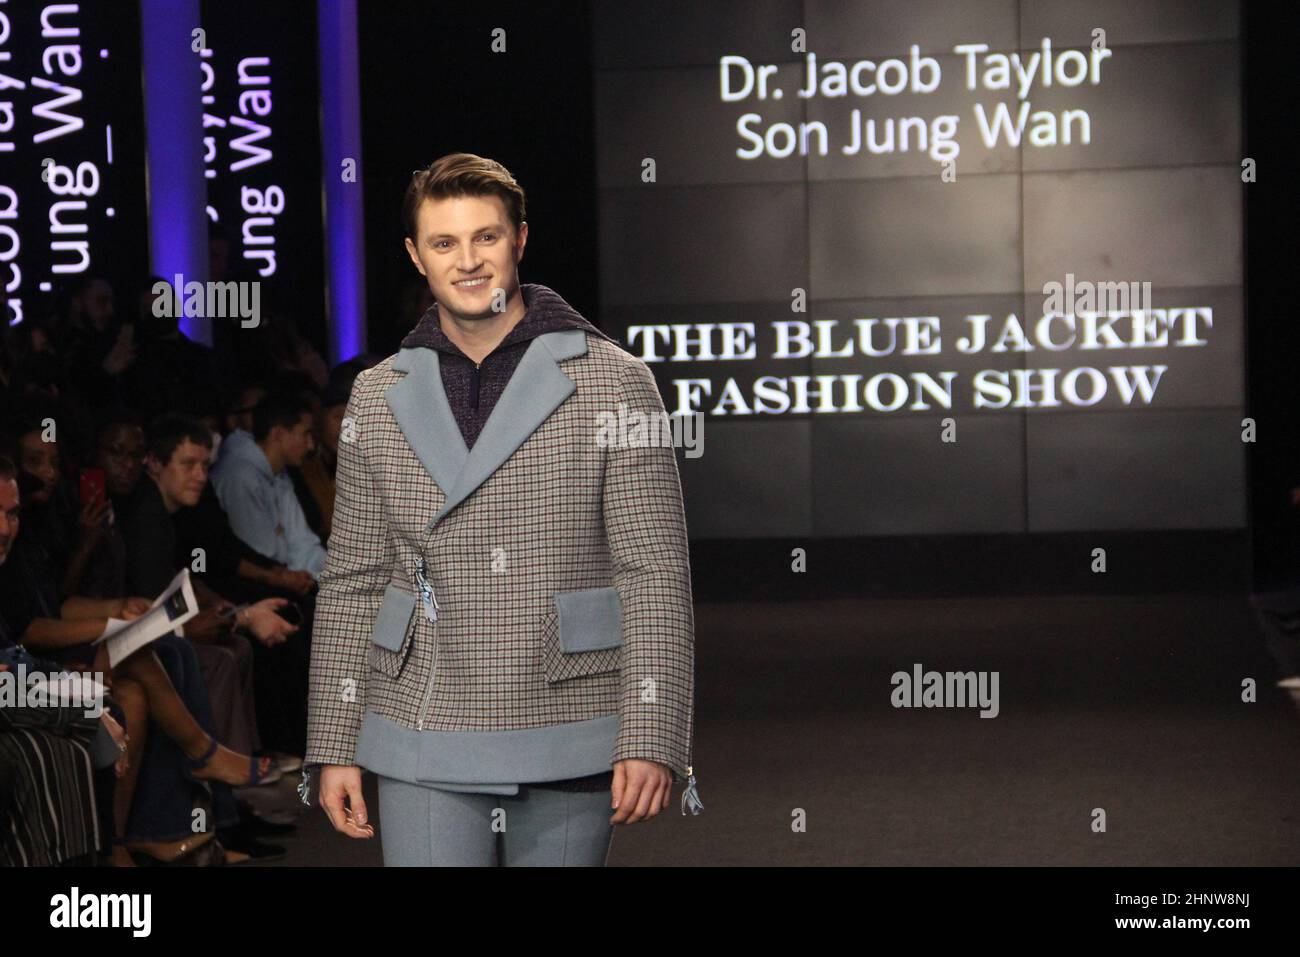 https://c8.alamy.com/comp/2HNW8NJ/new-york-ny-usa-17th-feb-2022-dr-jacob-taylor-at-the-sixth-annual-blue-jacket-fashion-show-in-support-of-prostate-cancer-at-moonlight-studios-in-new-york-city-on-february-17-2022-credit-erik-nielsenmedia-punchalamy-live-news-2HNW8NJ.jpg